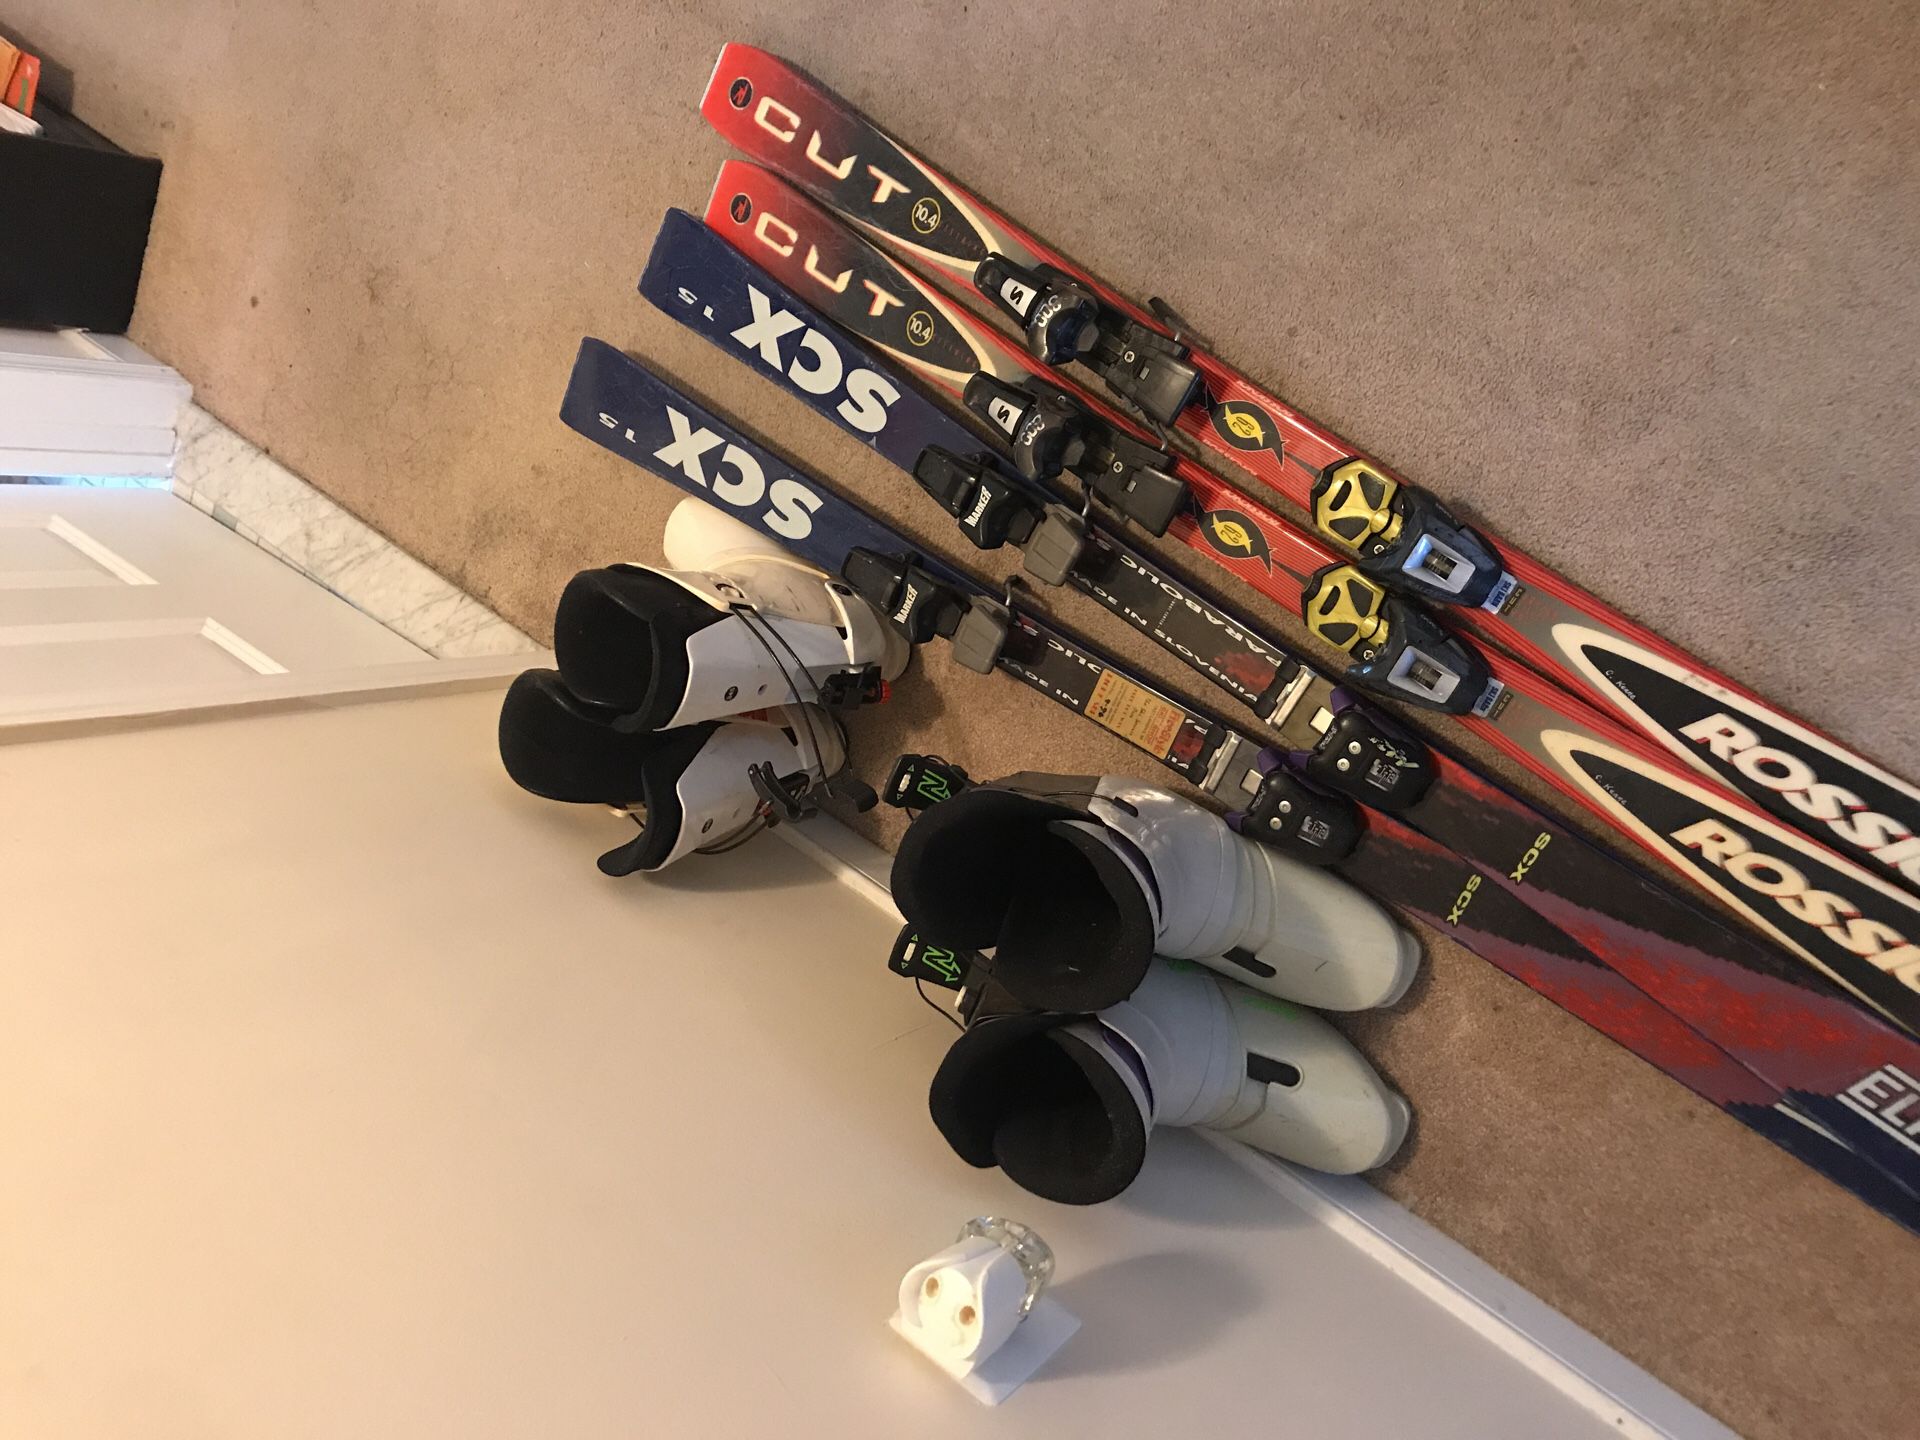 Skis and boots fit sizes 9-11 mens